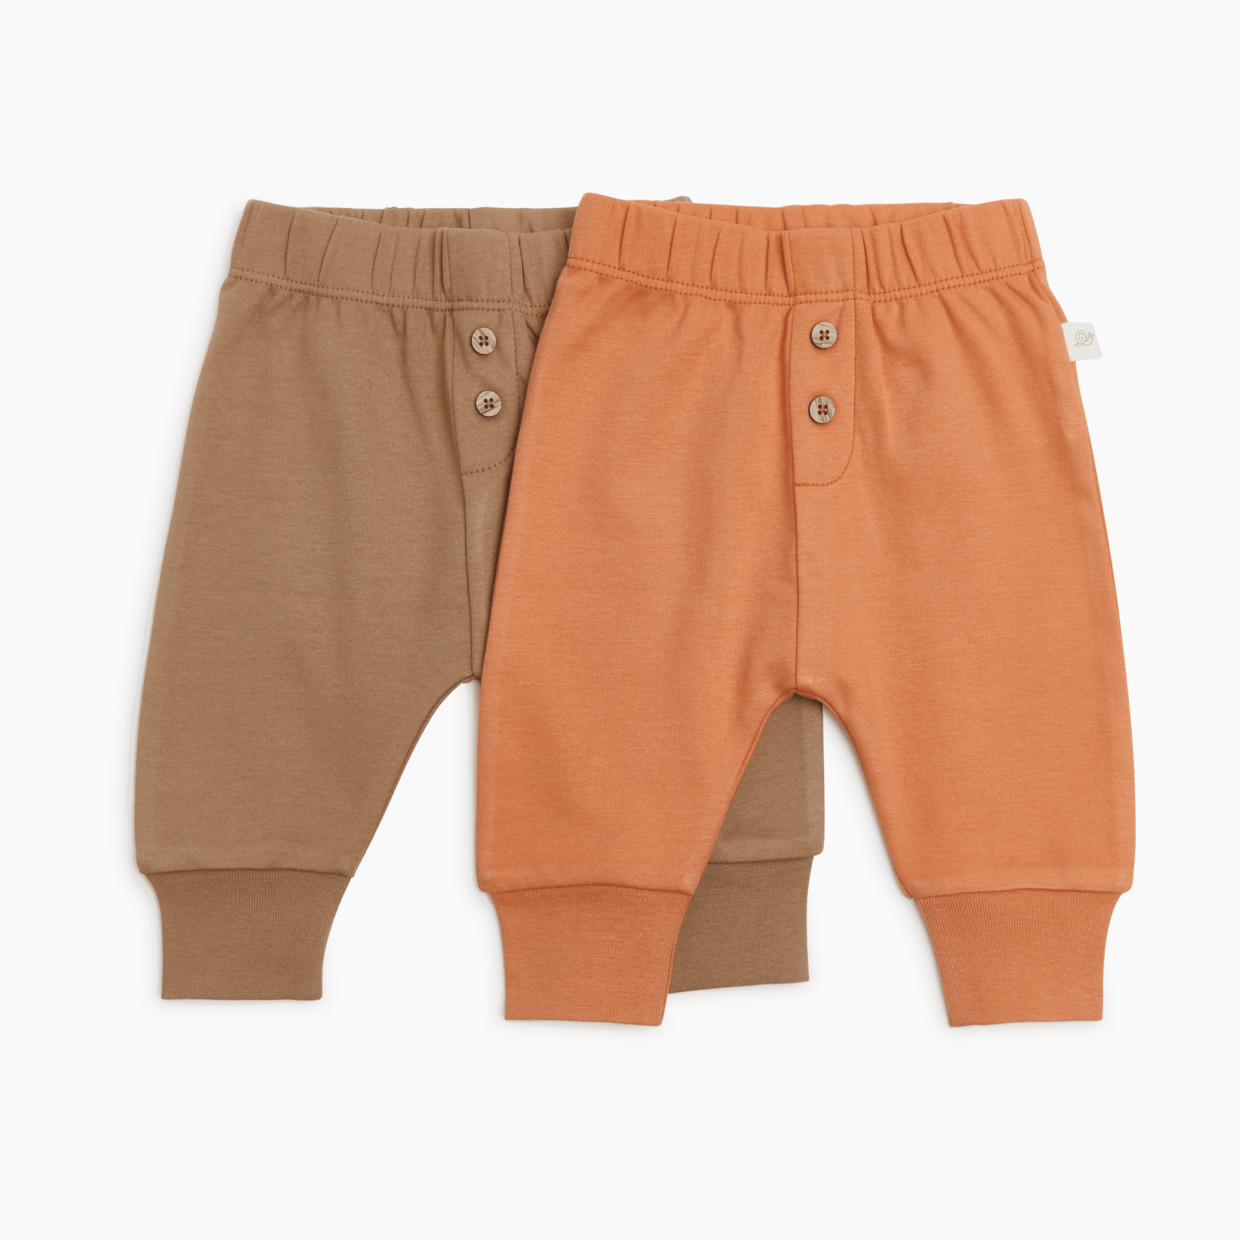 Tiny Kind 2 Pack Pants - Neutral Pack, 3-6 M.